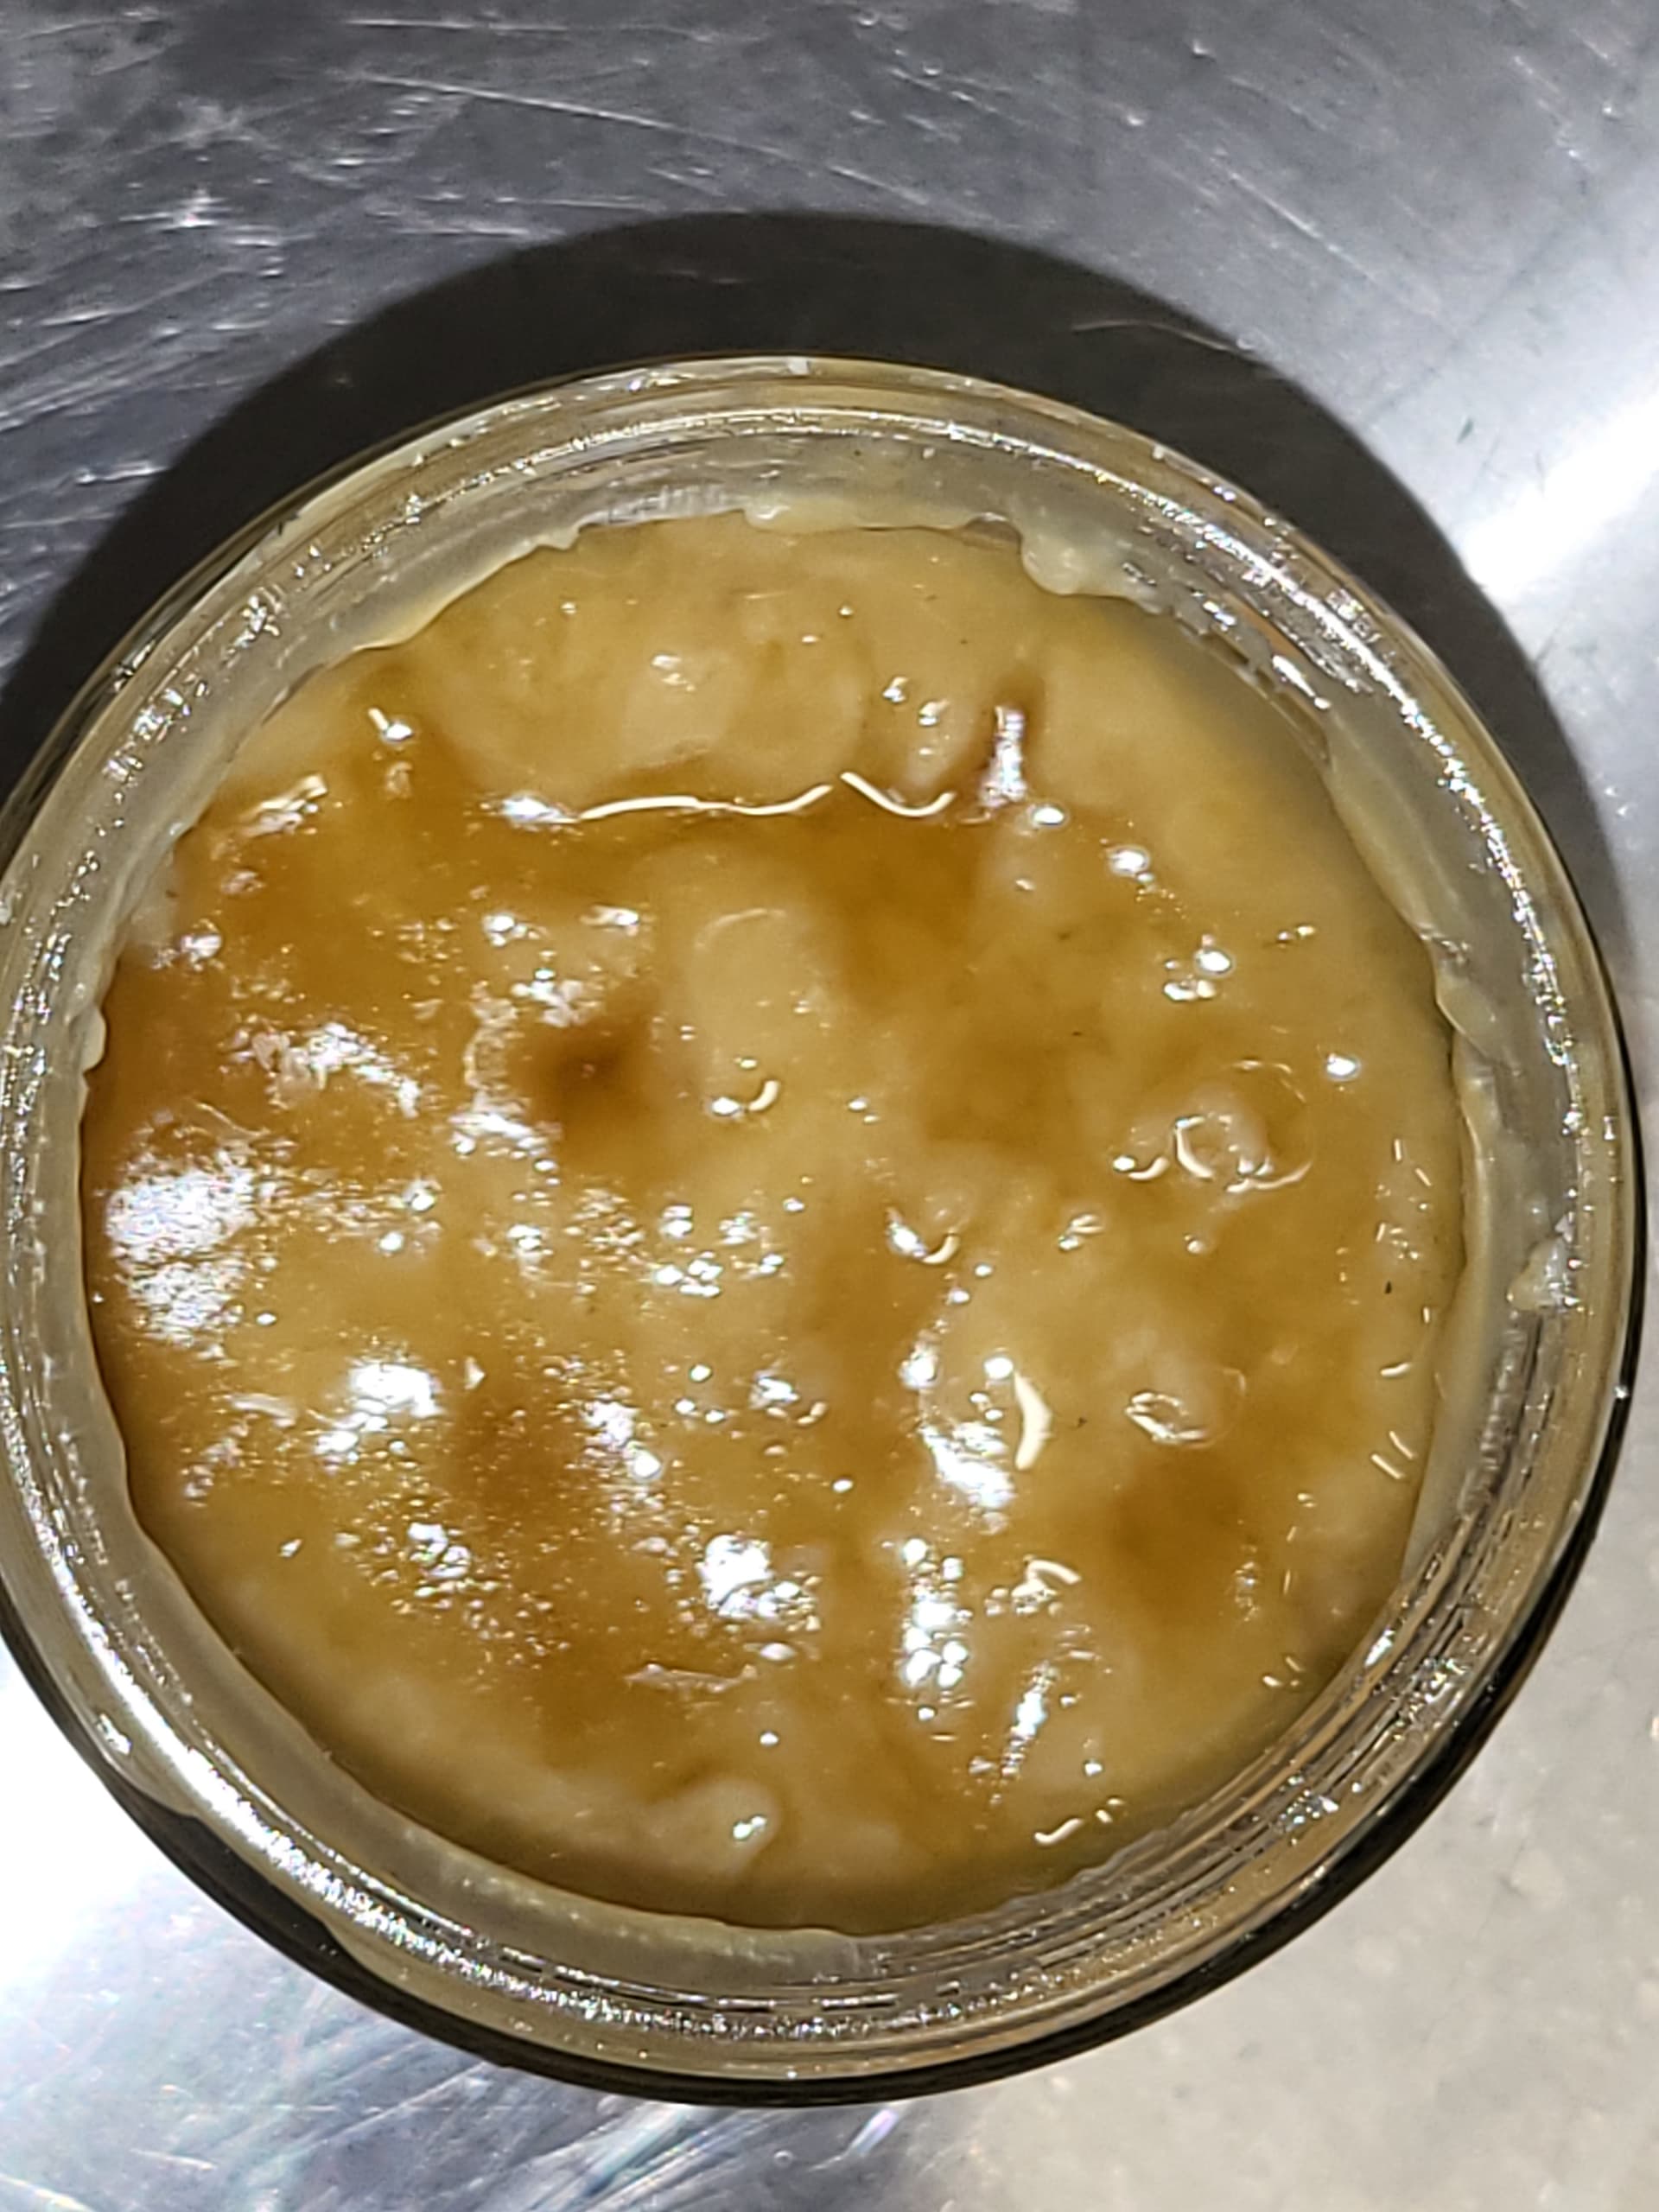 Dry sift rosin - Solventless - Future4200